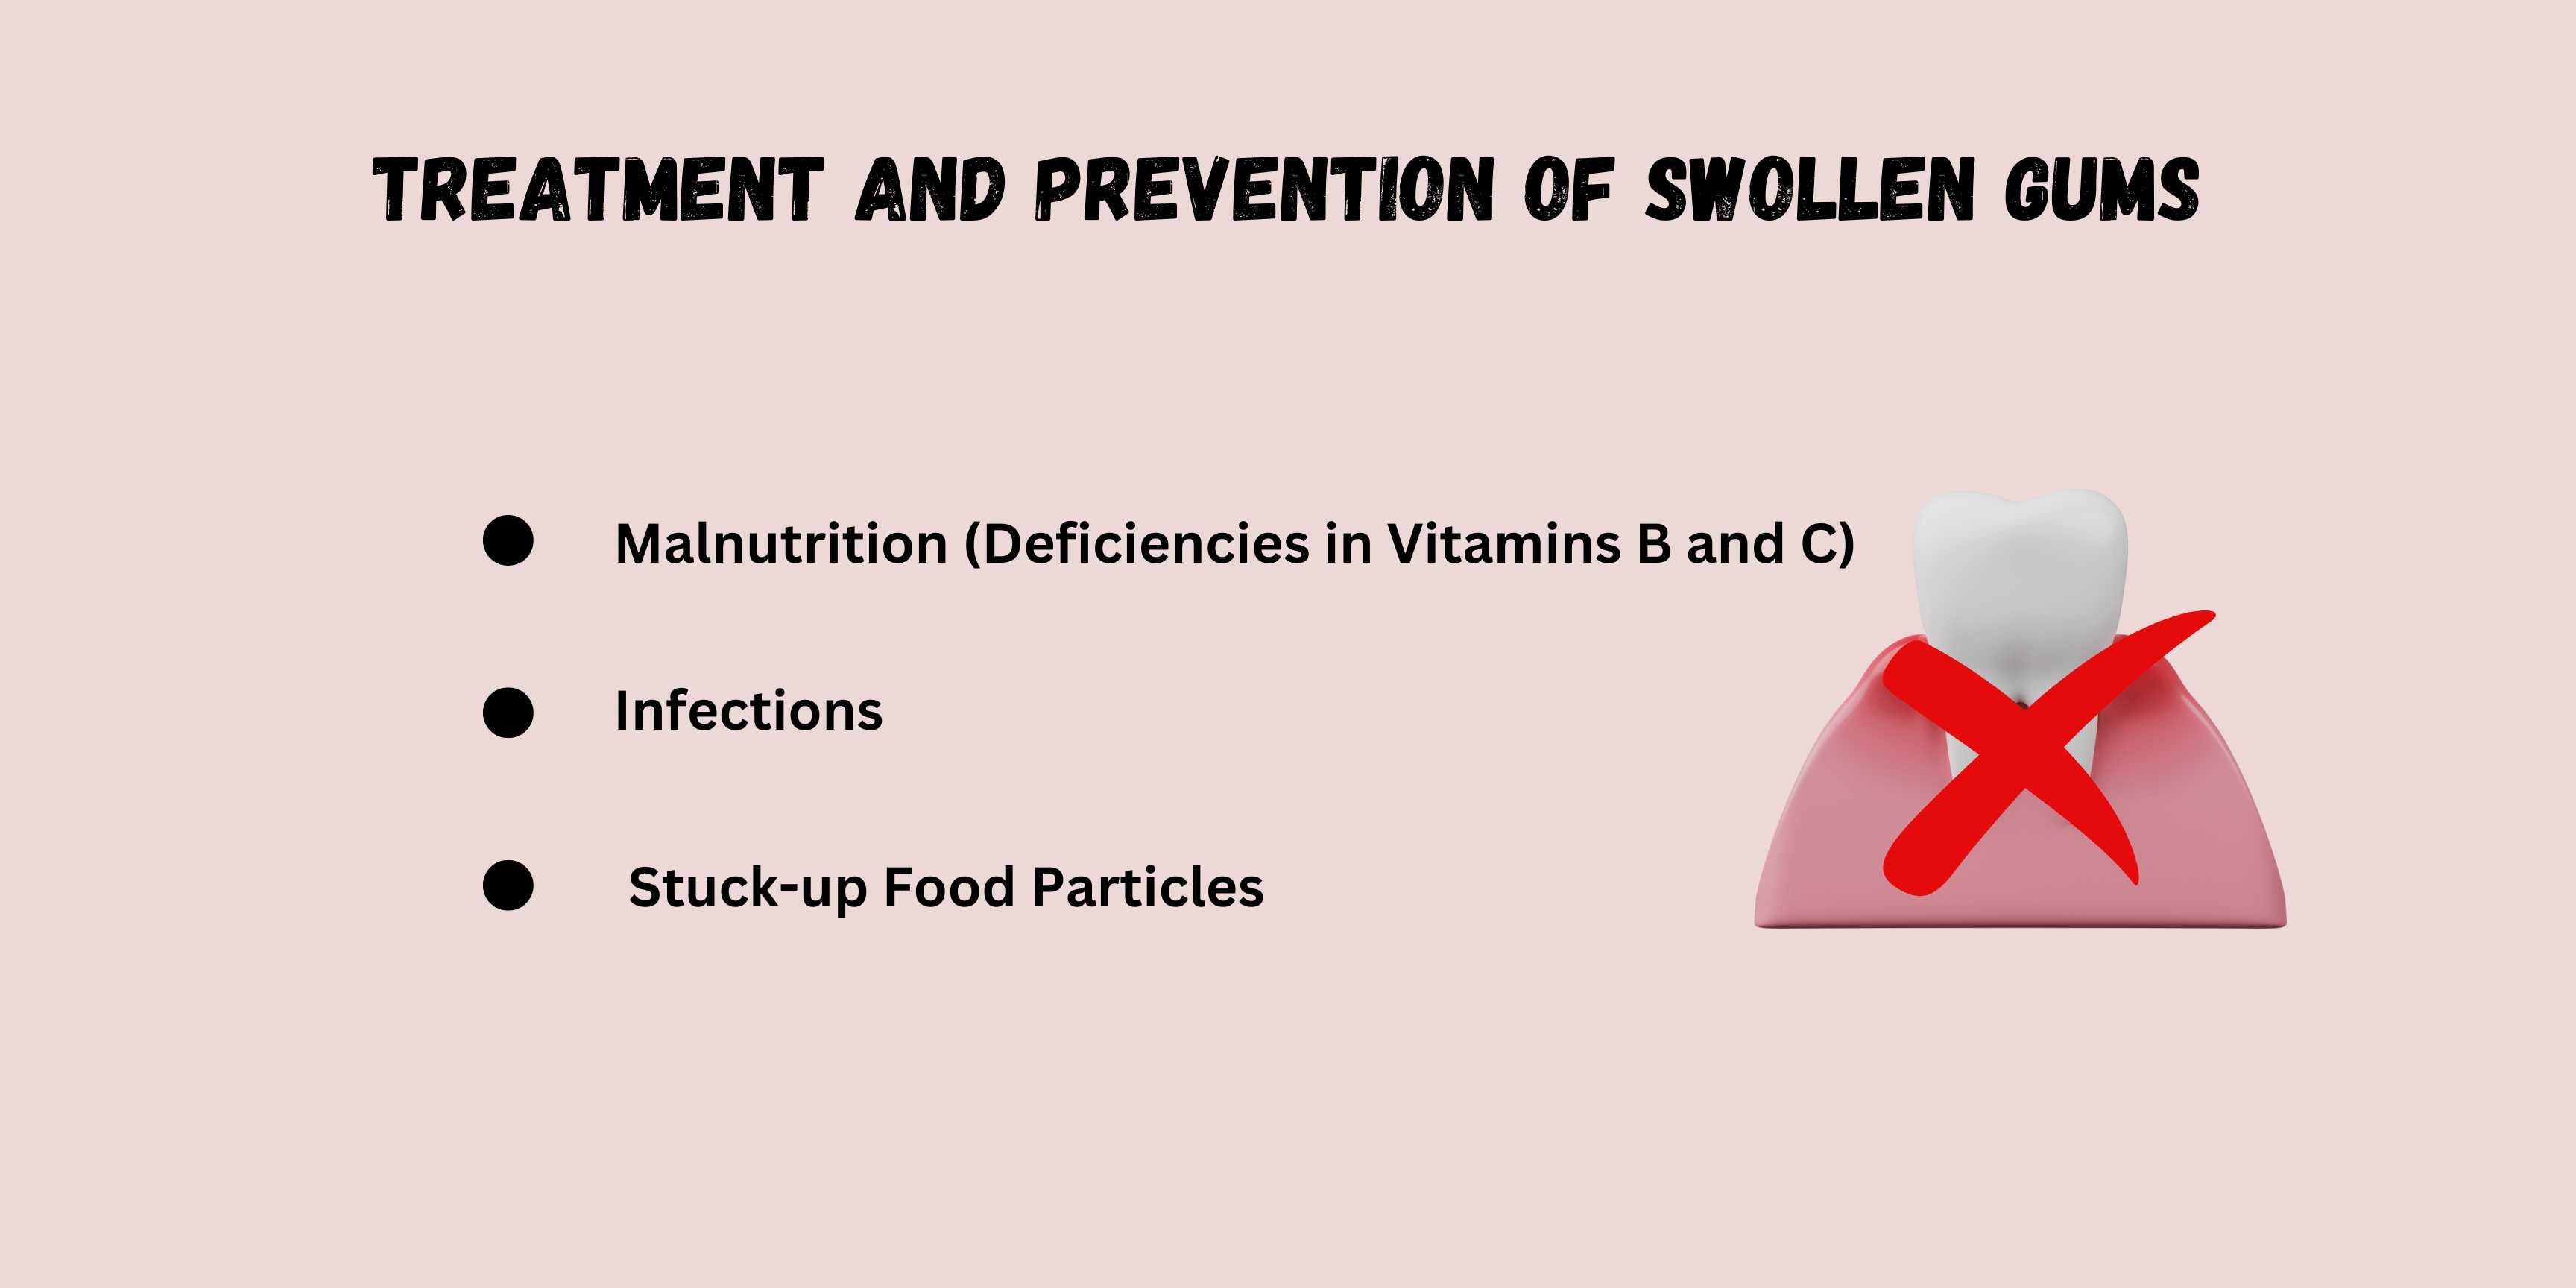 Treatment and Prevention of Swollen Gums